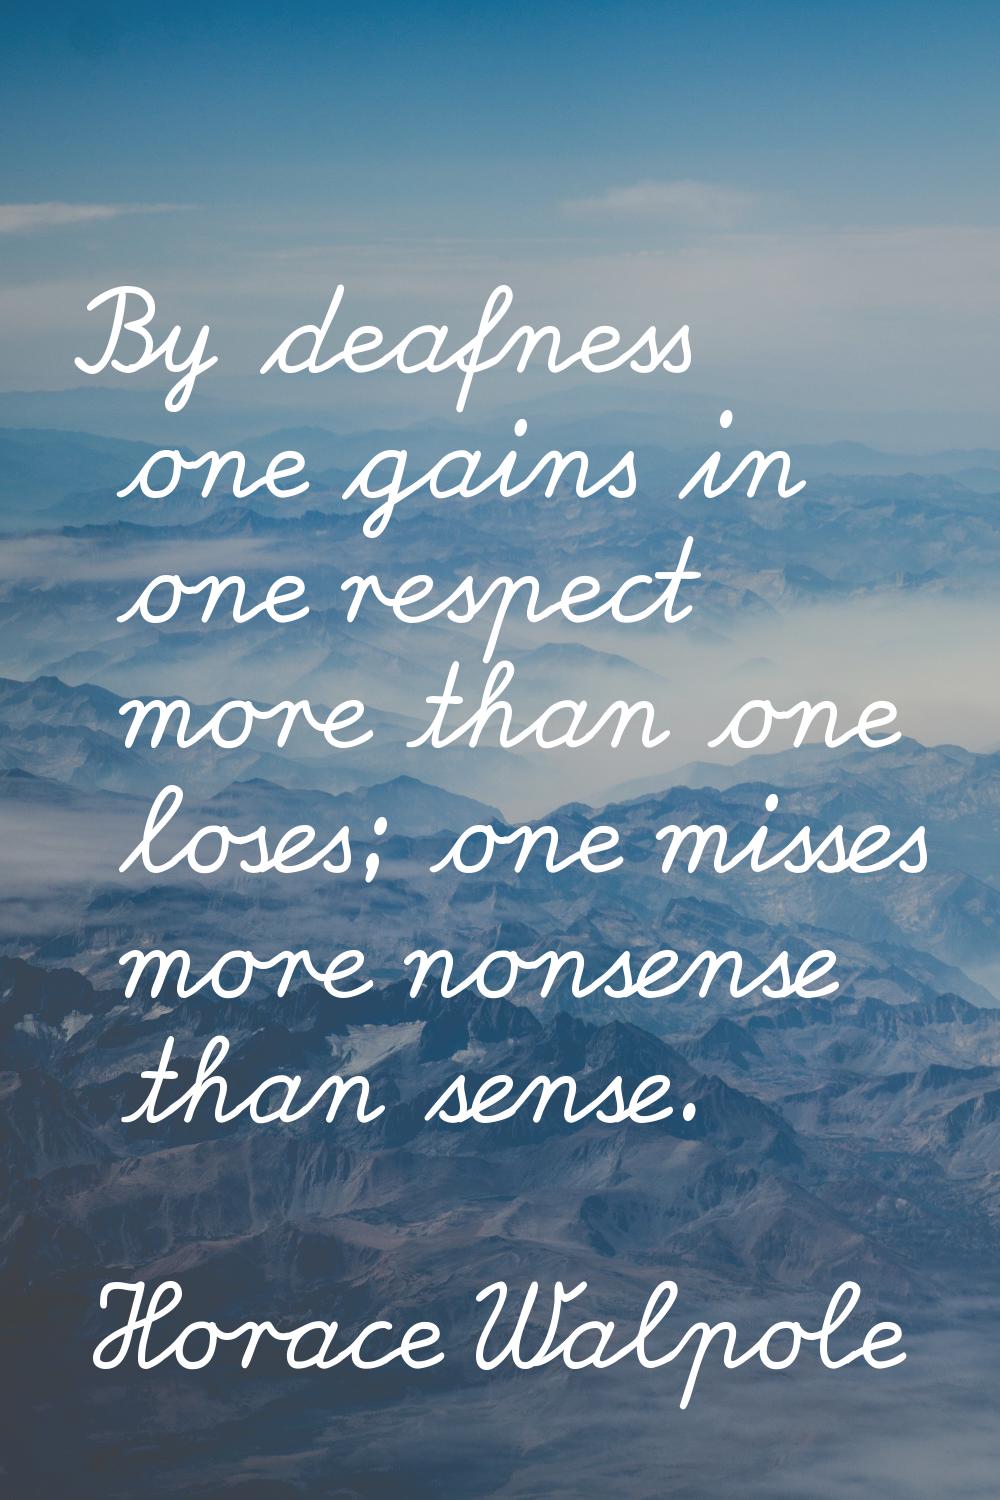 By deafness one gains in one respect more than one loses; one misses more nonsense than sense.